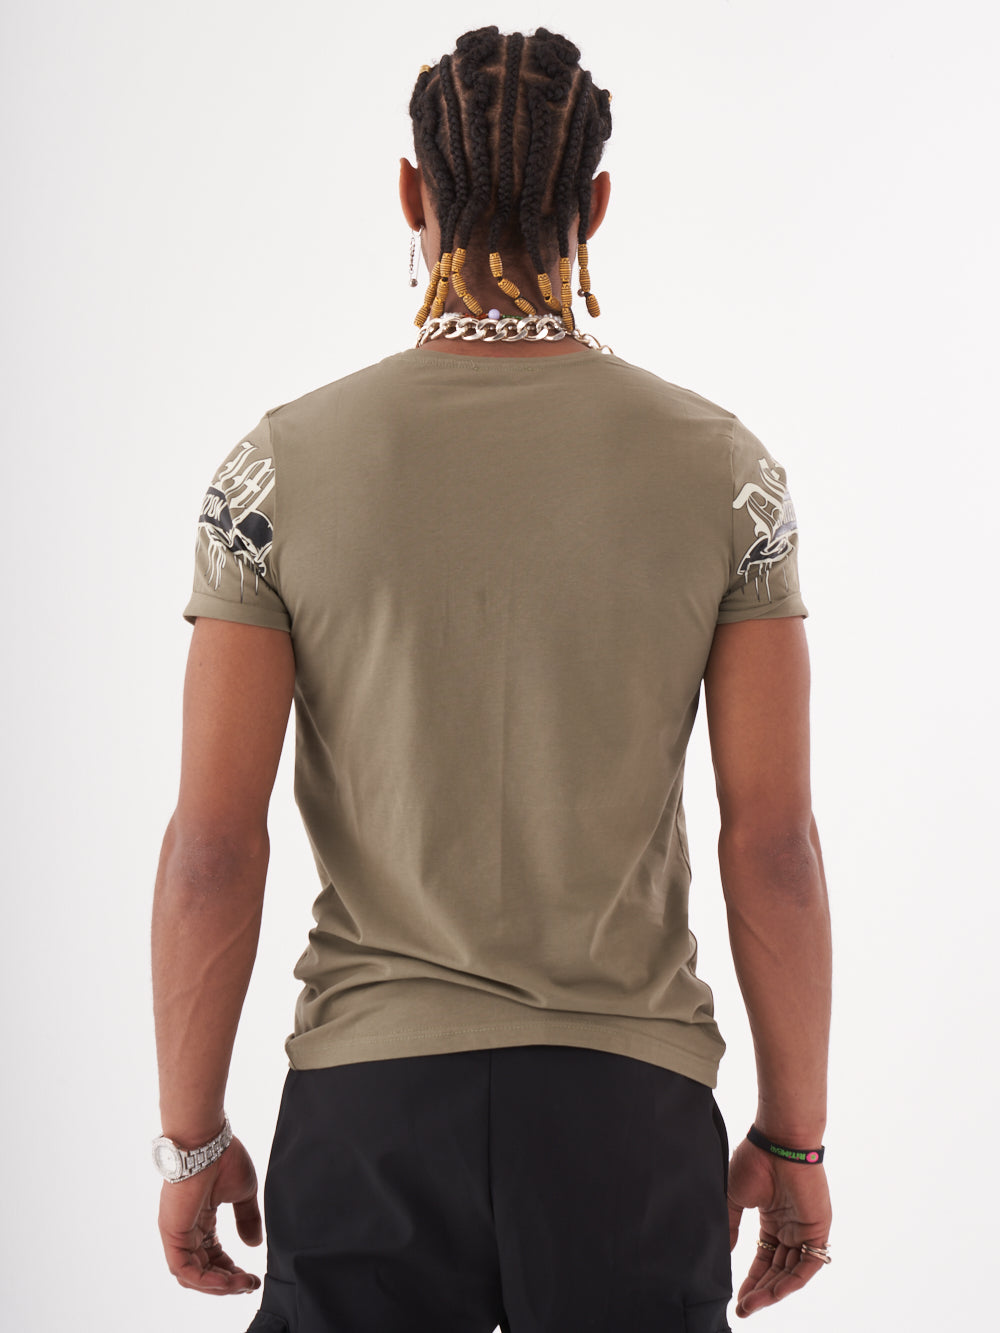 The SKULL CRUSHER T-SHIRT | GREEN emphasizes the slim fit of the man's back view.